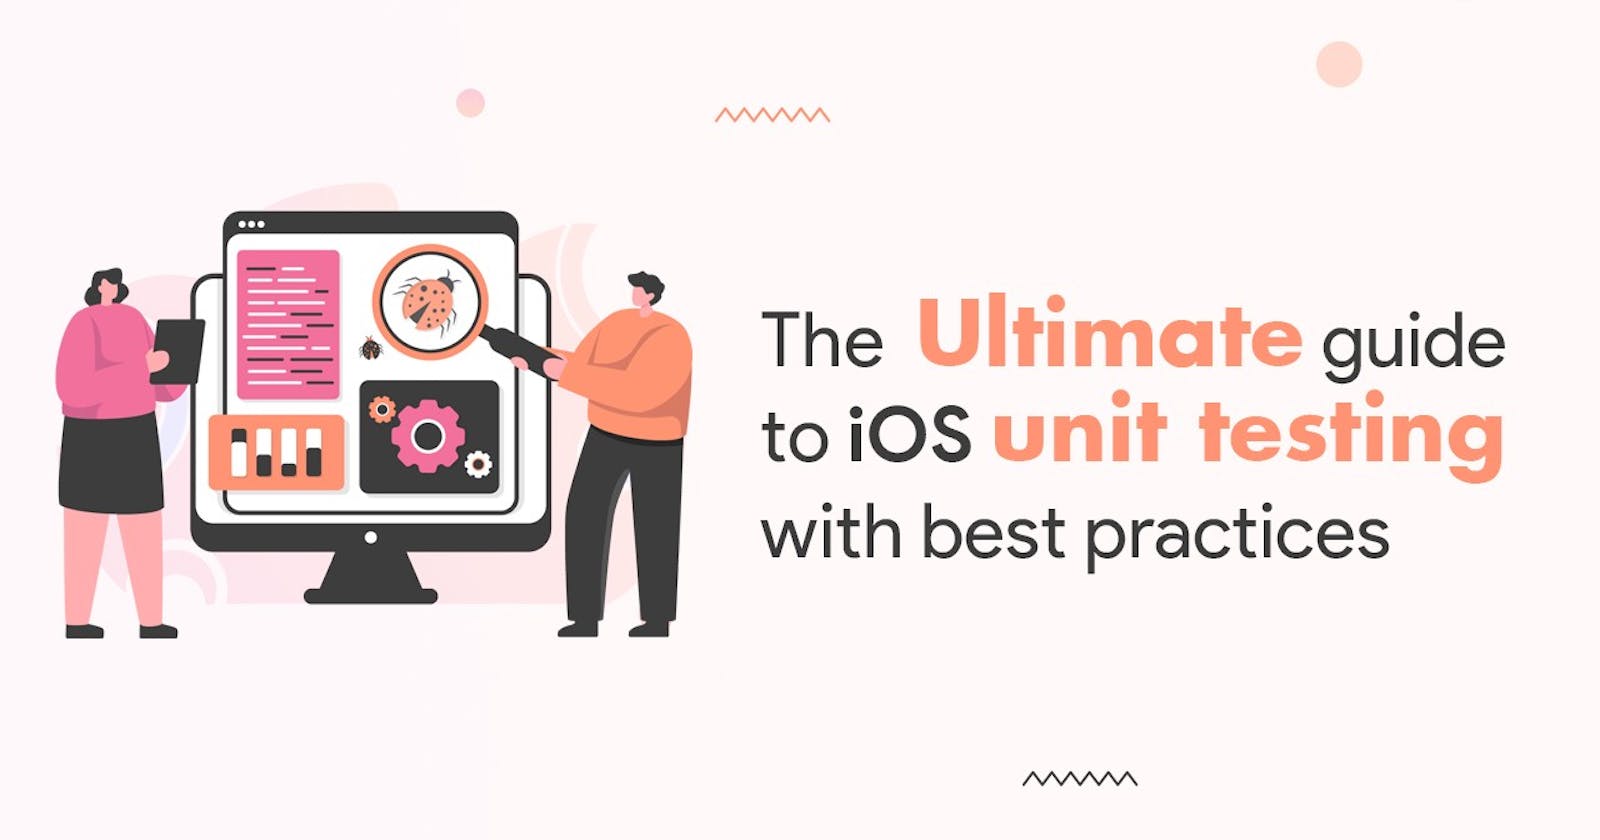 The Ultimate guide to iOS unit testing with best practices — Part 1